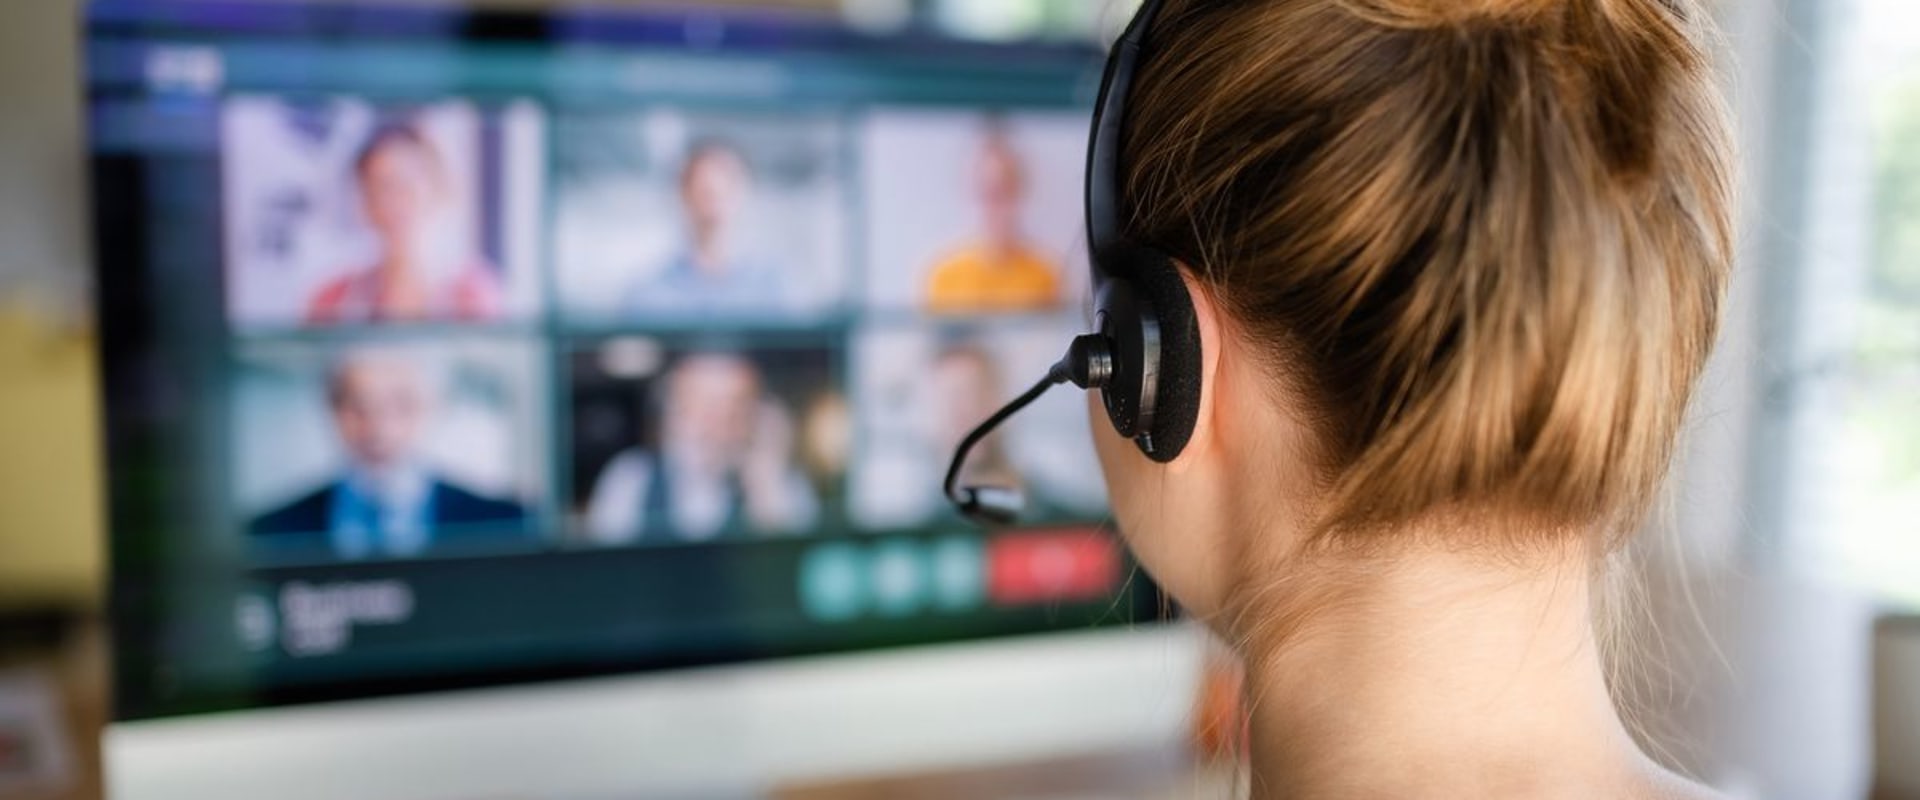 Microphones and Speakers: How to Choose the Right Option for Video Conferencing